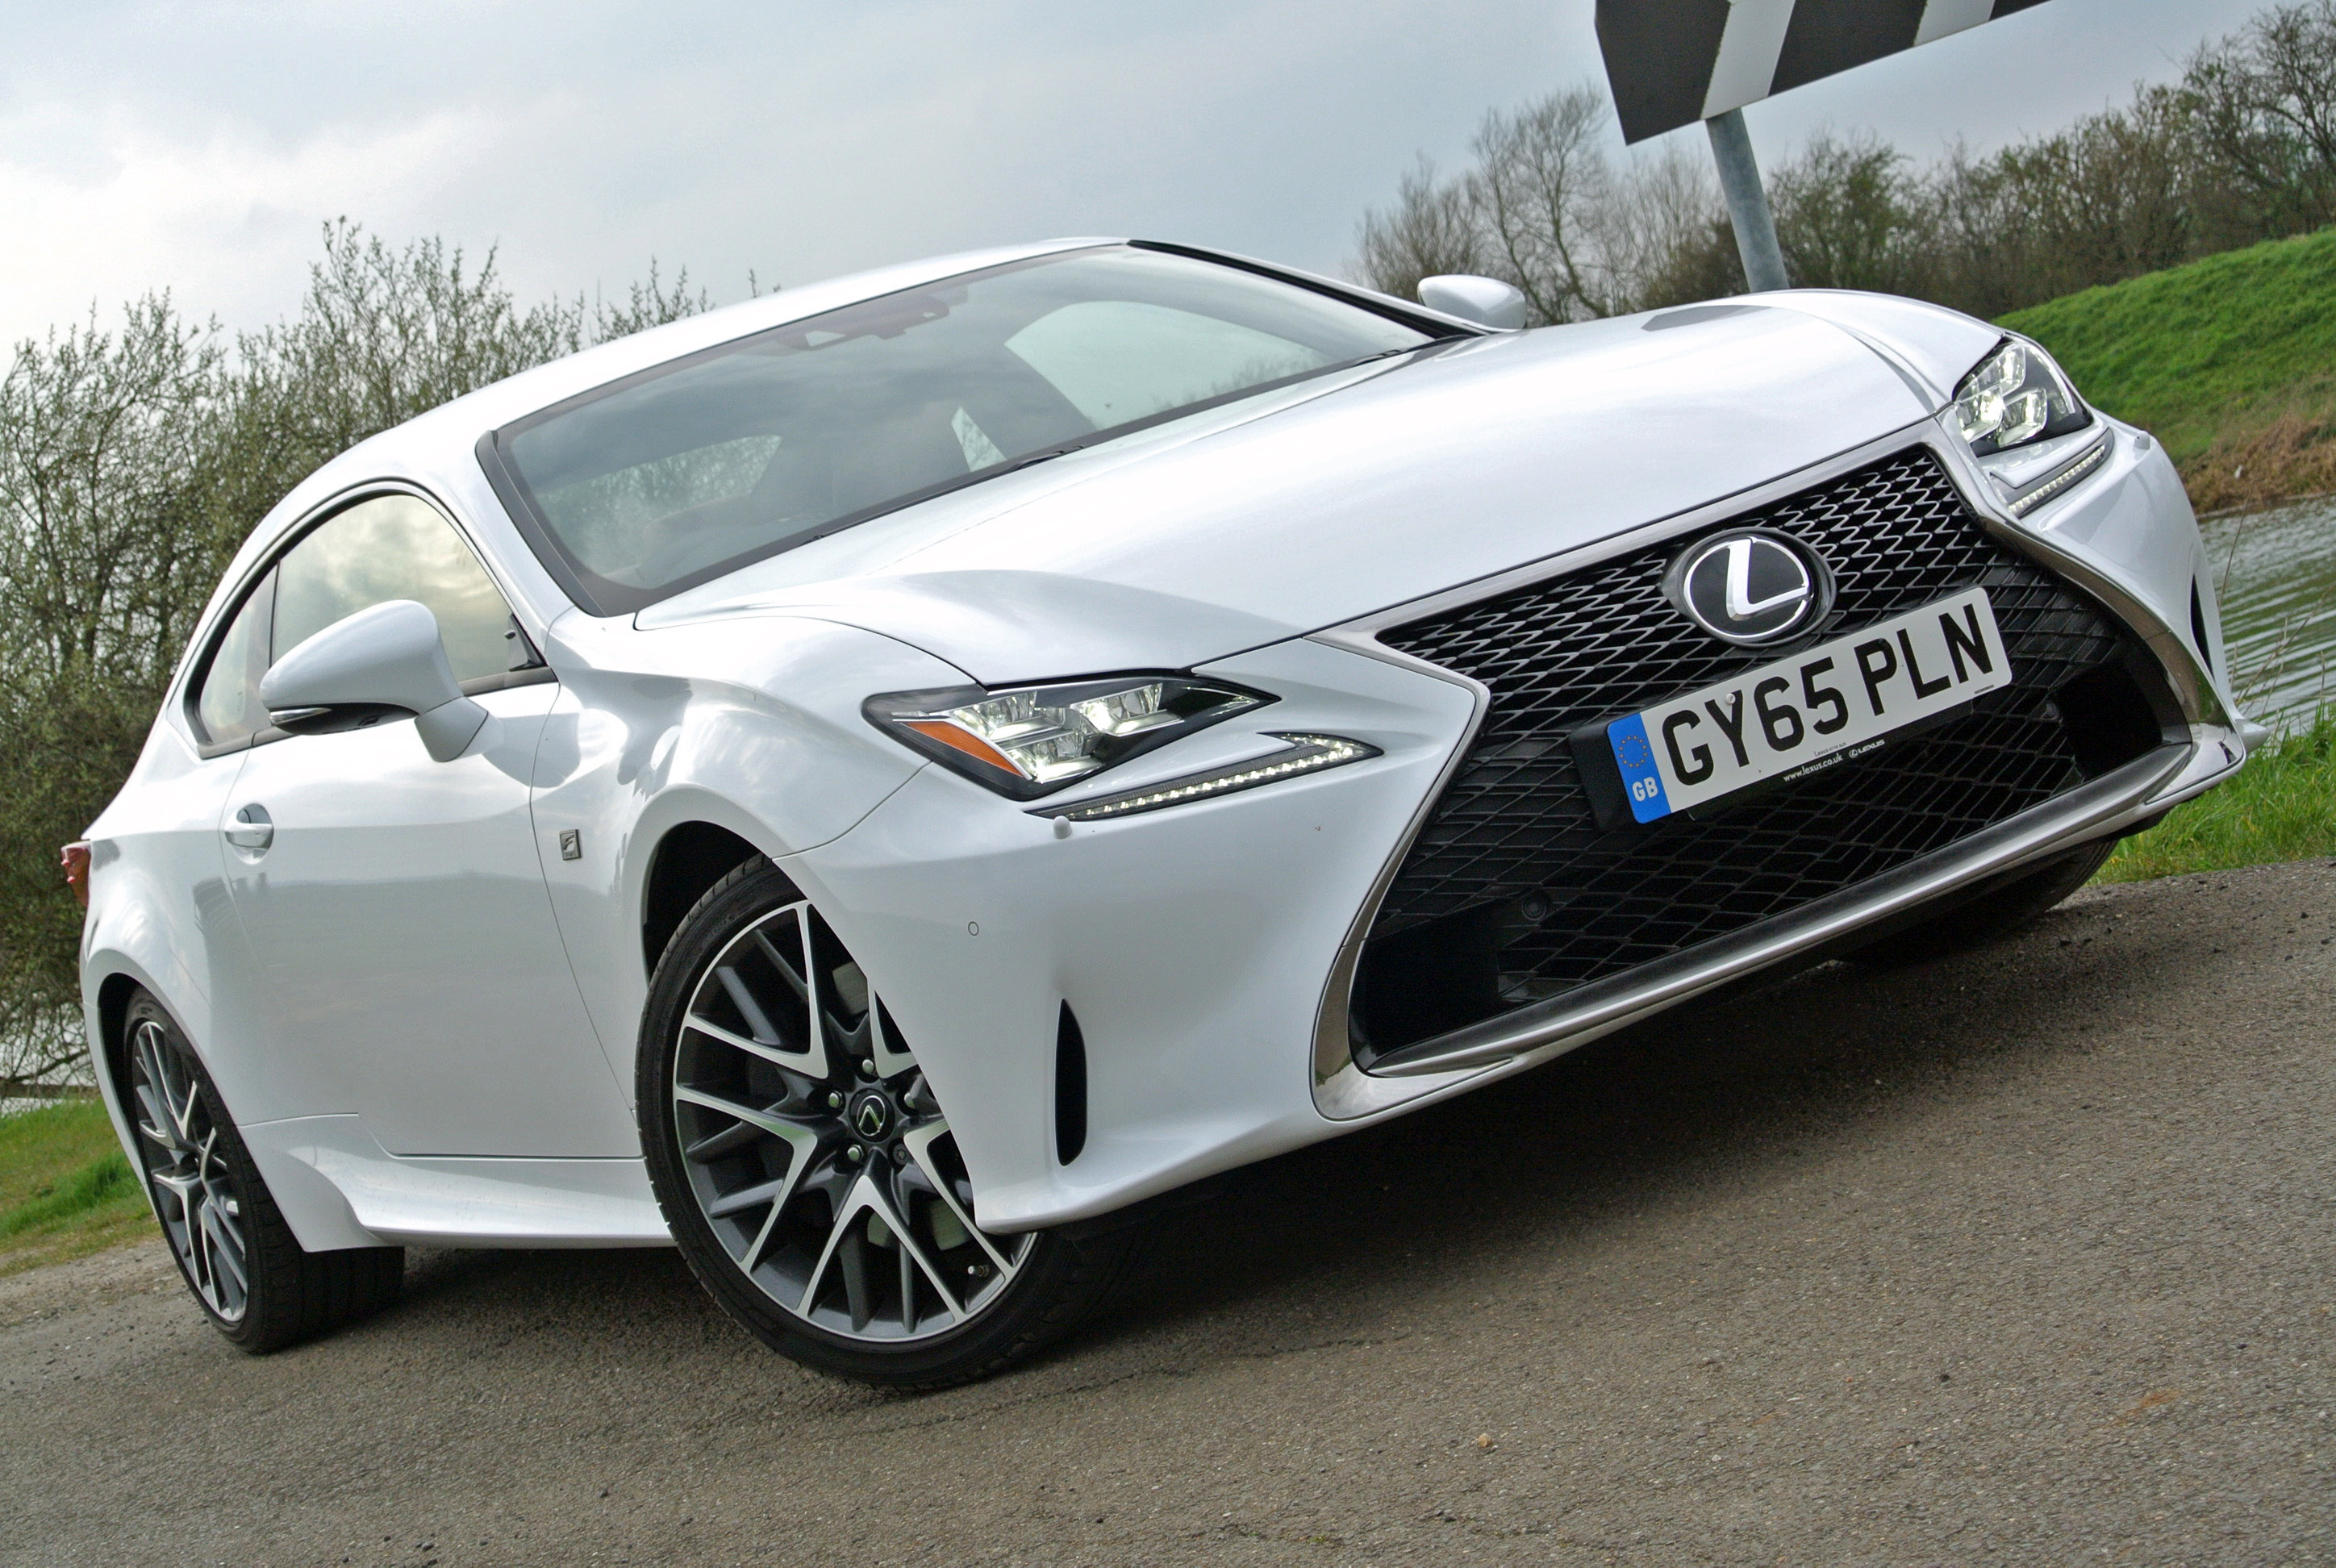 Lexus tackles the 2+2 scene with consummate ease in the RC200t